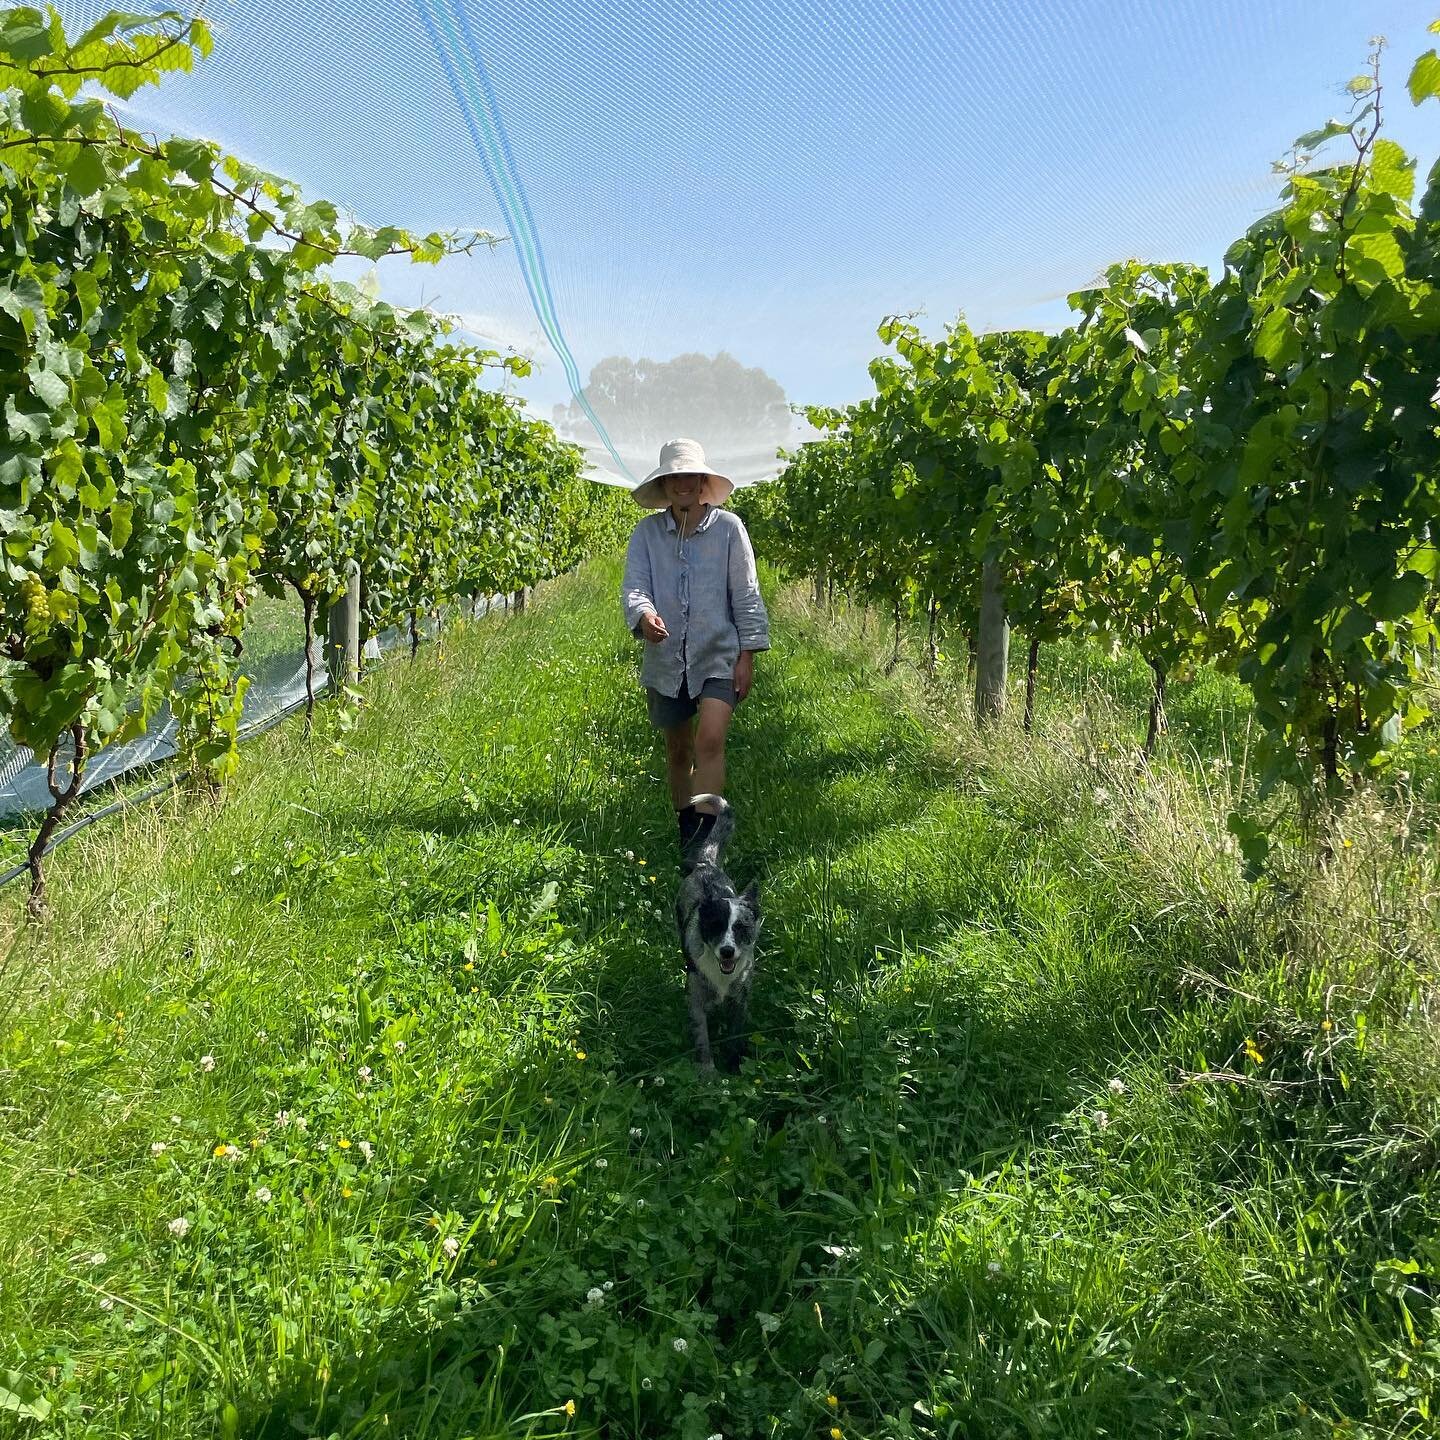 Some of the best moments are between the nets going on and starting harvest, particularly walking through the vineyard at dusk and tasting the progression in the berries. Fruit is looking beautiful and it looks like we&rsquo;ll need a little extra he